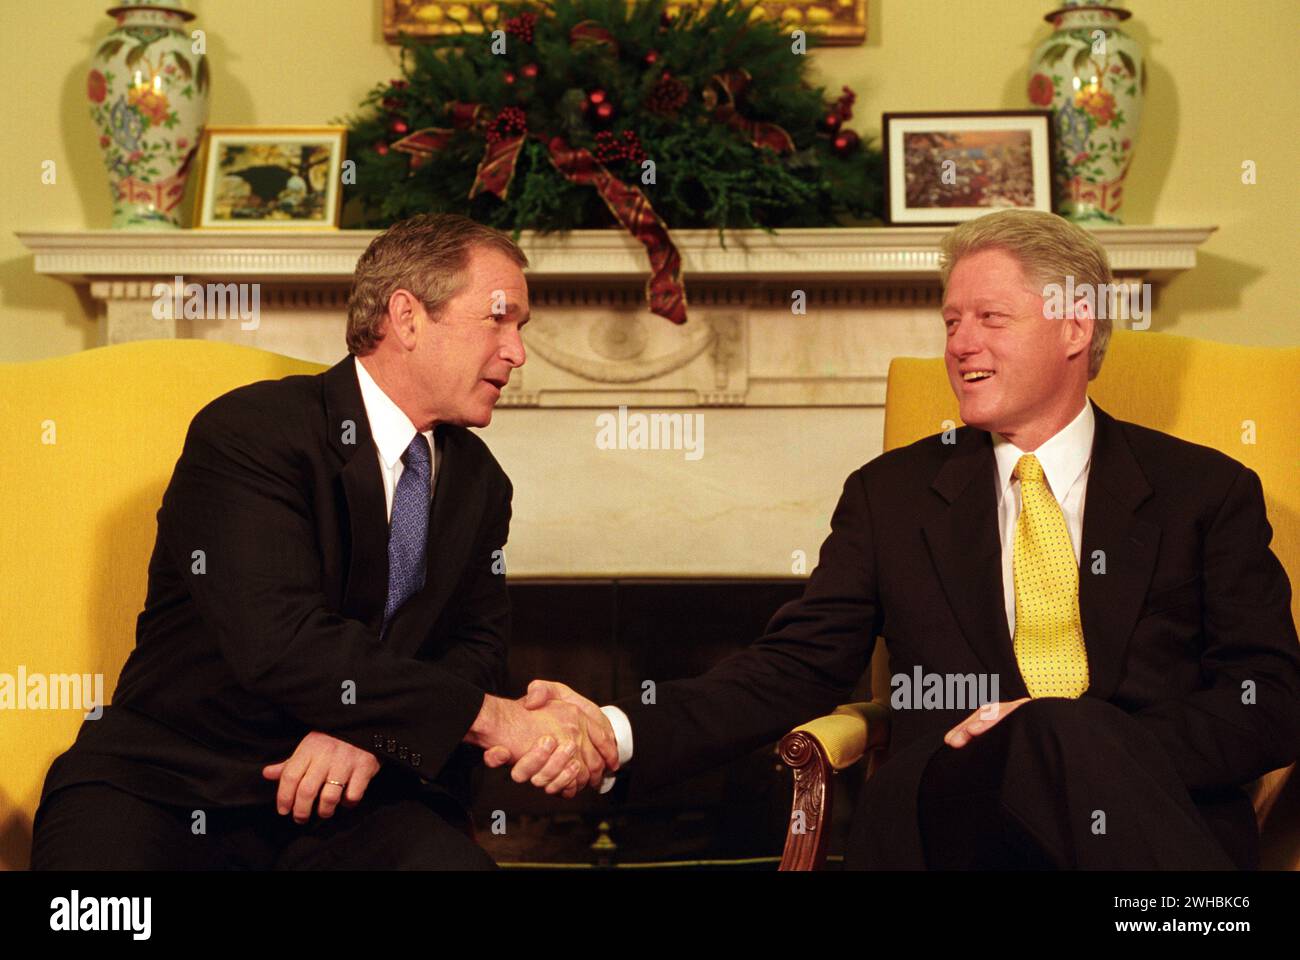 President Bill Clinton and President-Elect George W. Bush shake hands during their meeting in the Oval Office Stock Photo